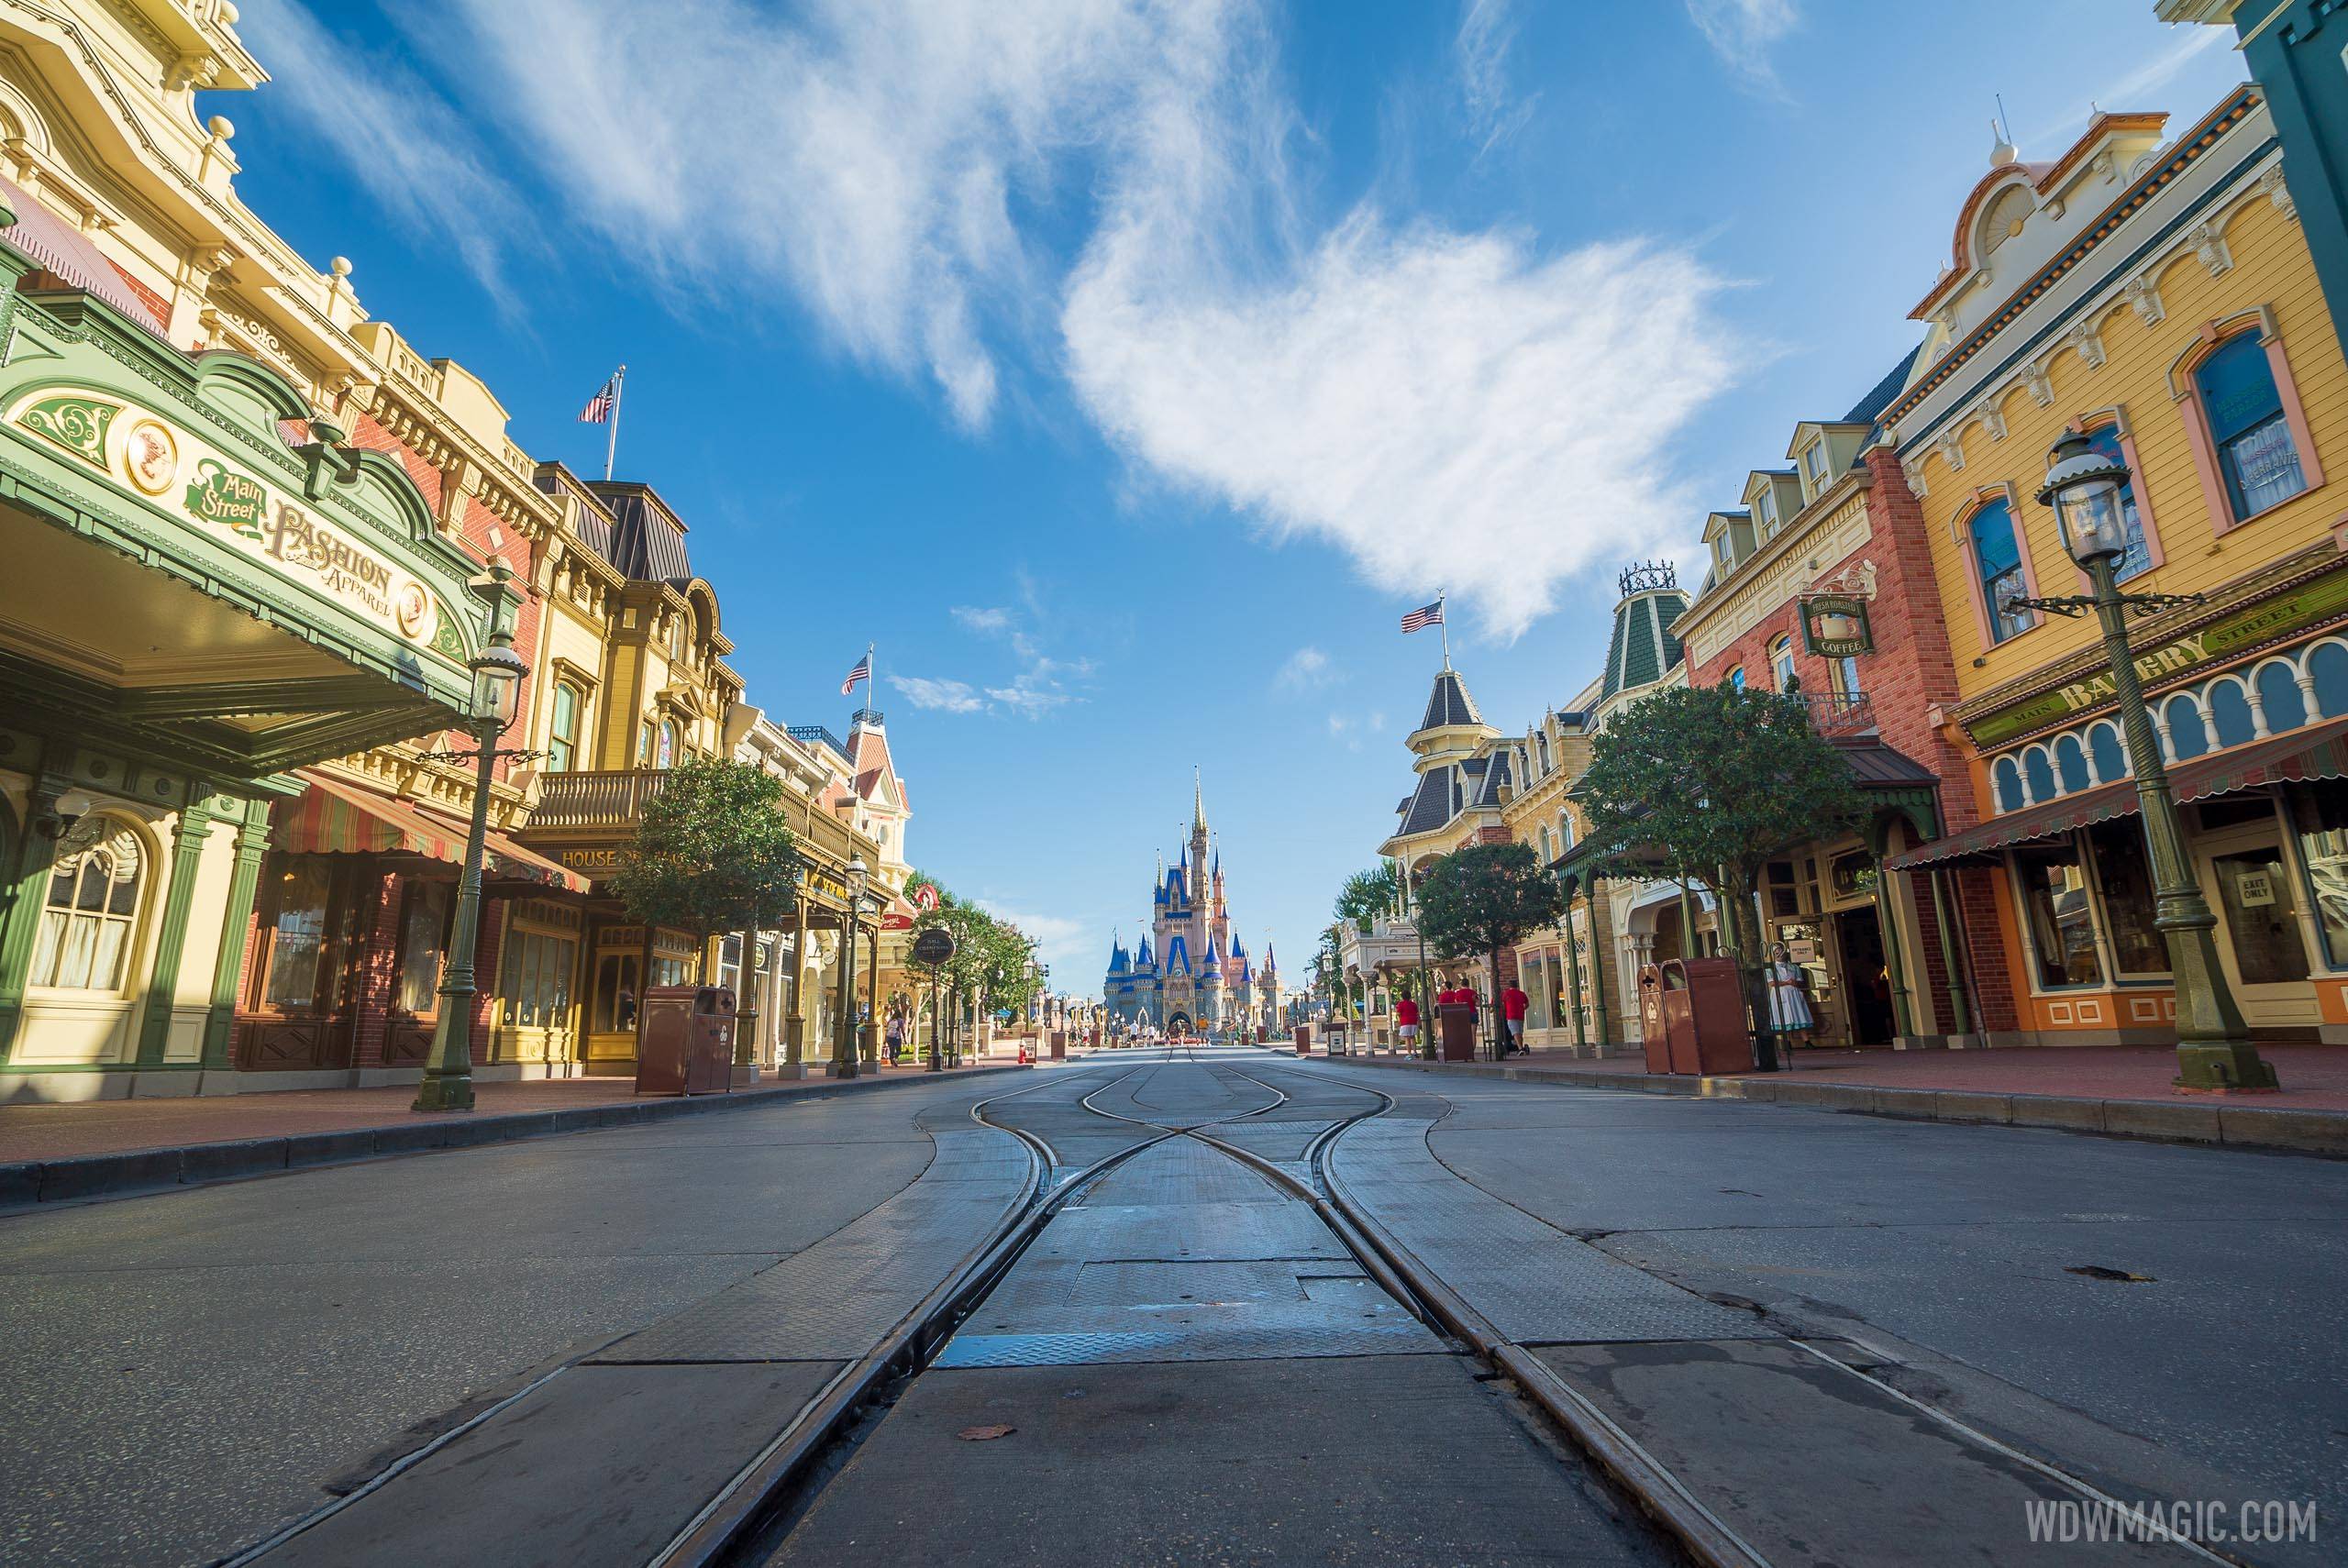 The Magic Kingdom would normally be at near-peak levels during the height of the summer season